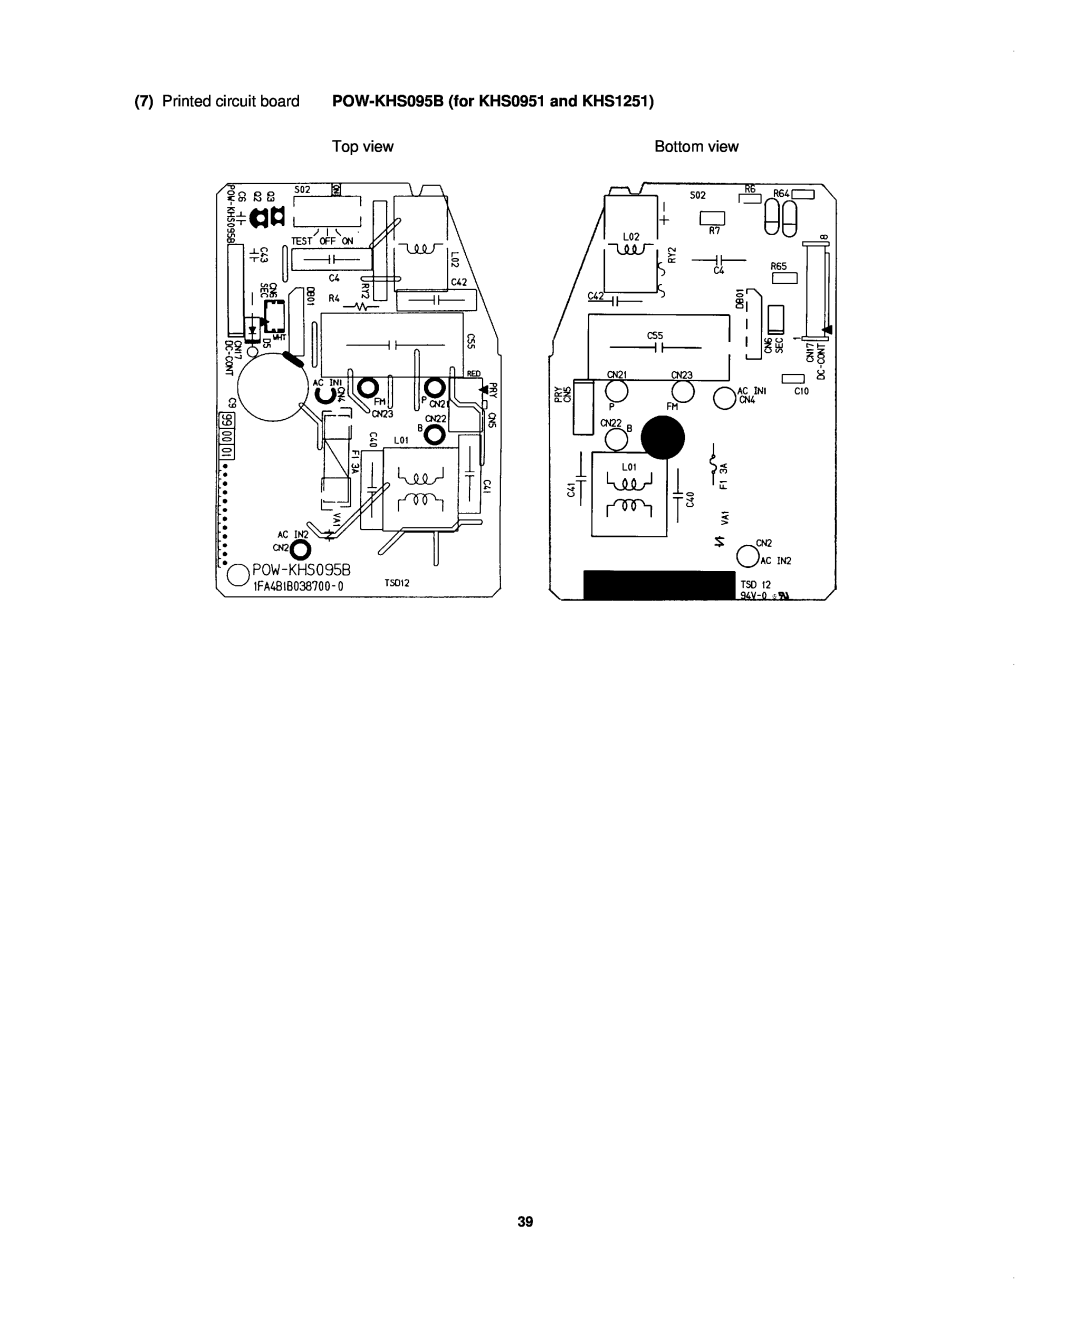 Sanyo CH0952, CH1852, KHS1852-S service manual Top view, Bottom view 